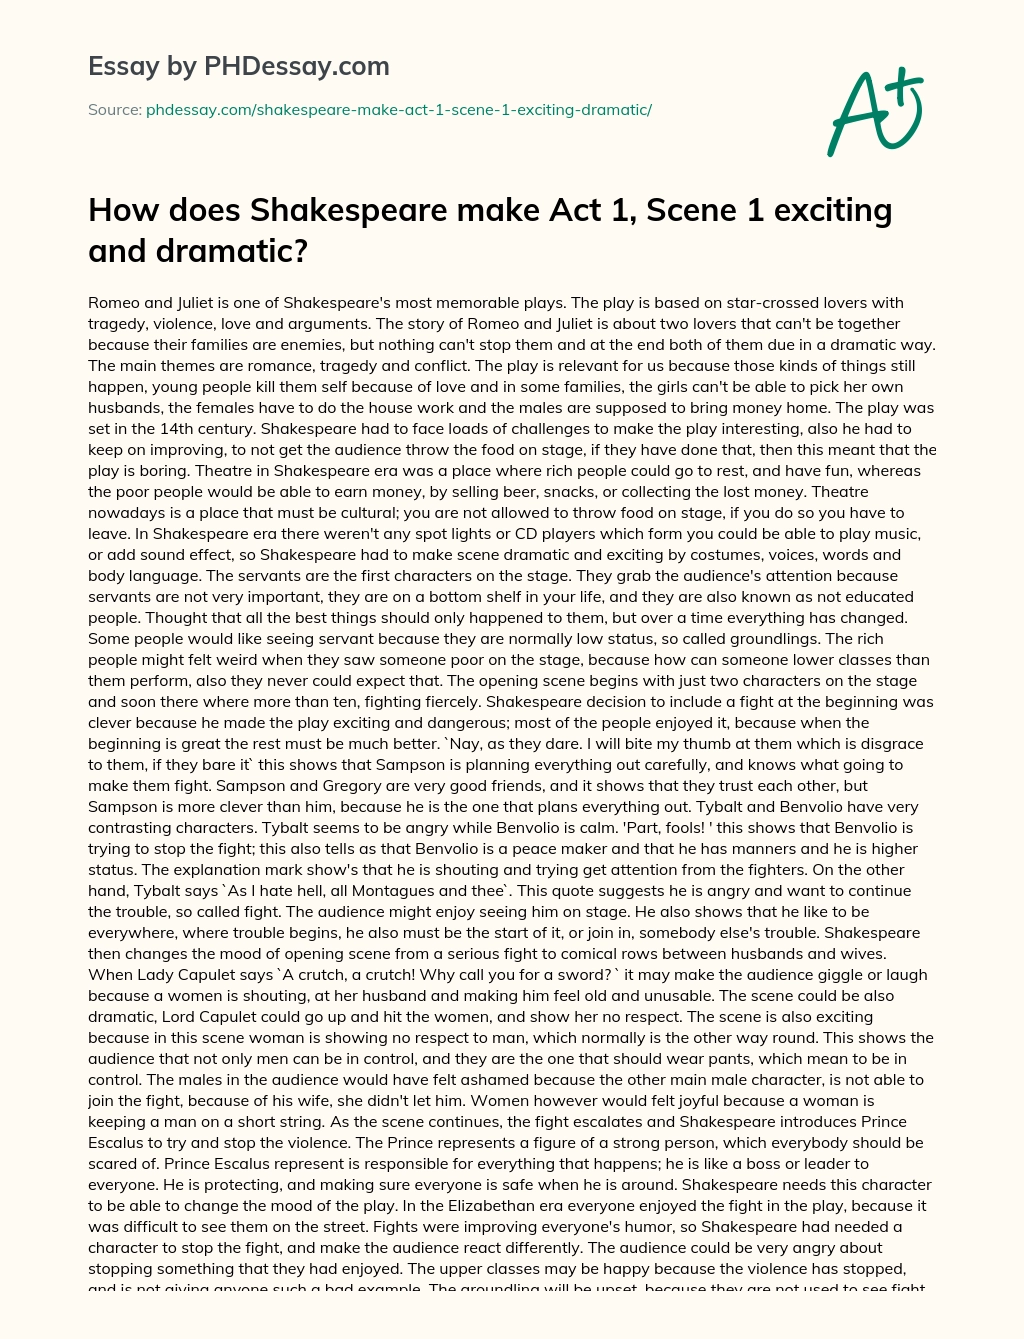 How does Shakespeare make Act 1, Scene 1 exciting and dramatic? essay